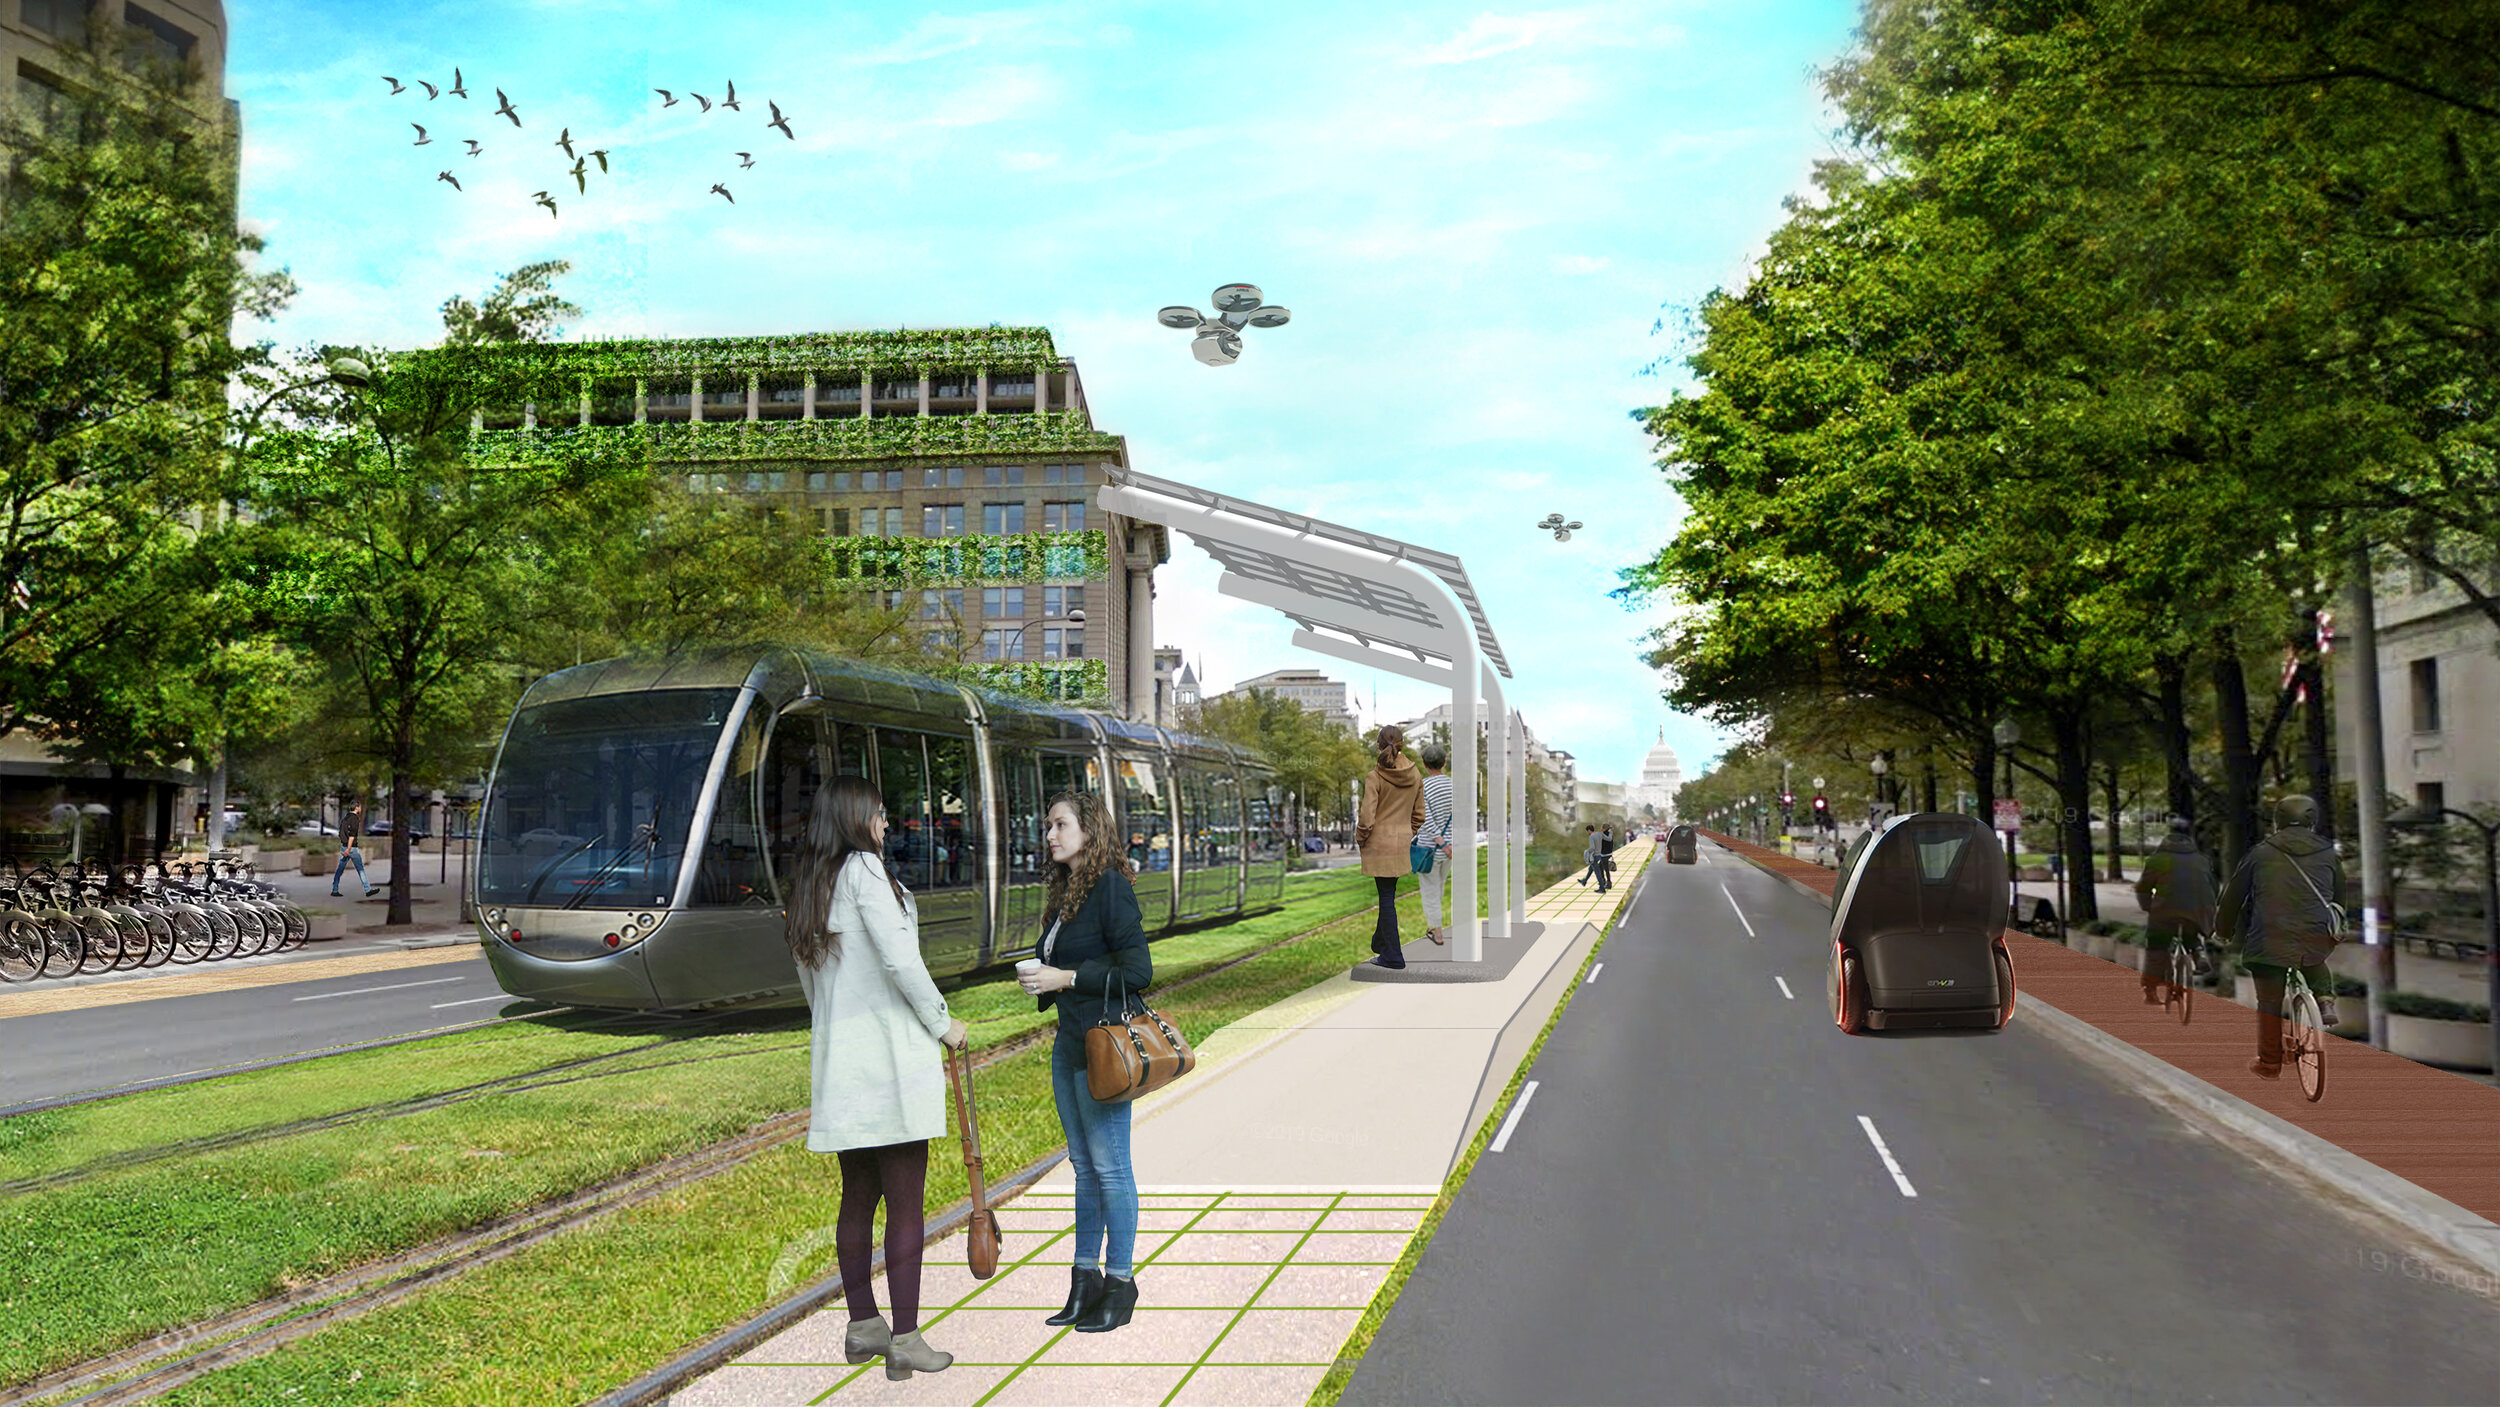  The transitways favors pedestrian and public oriented mobility and increased biodiversity. 